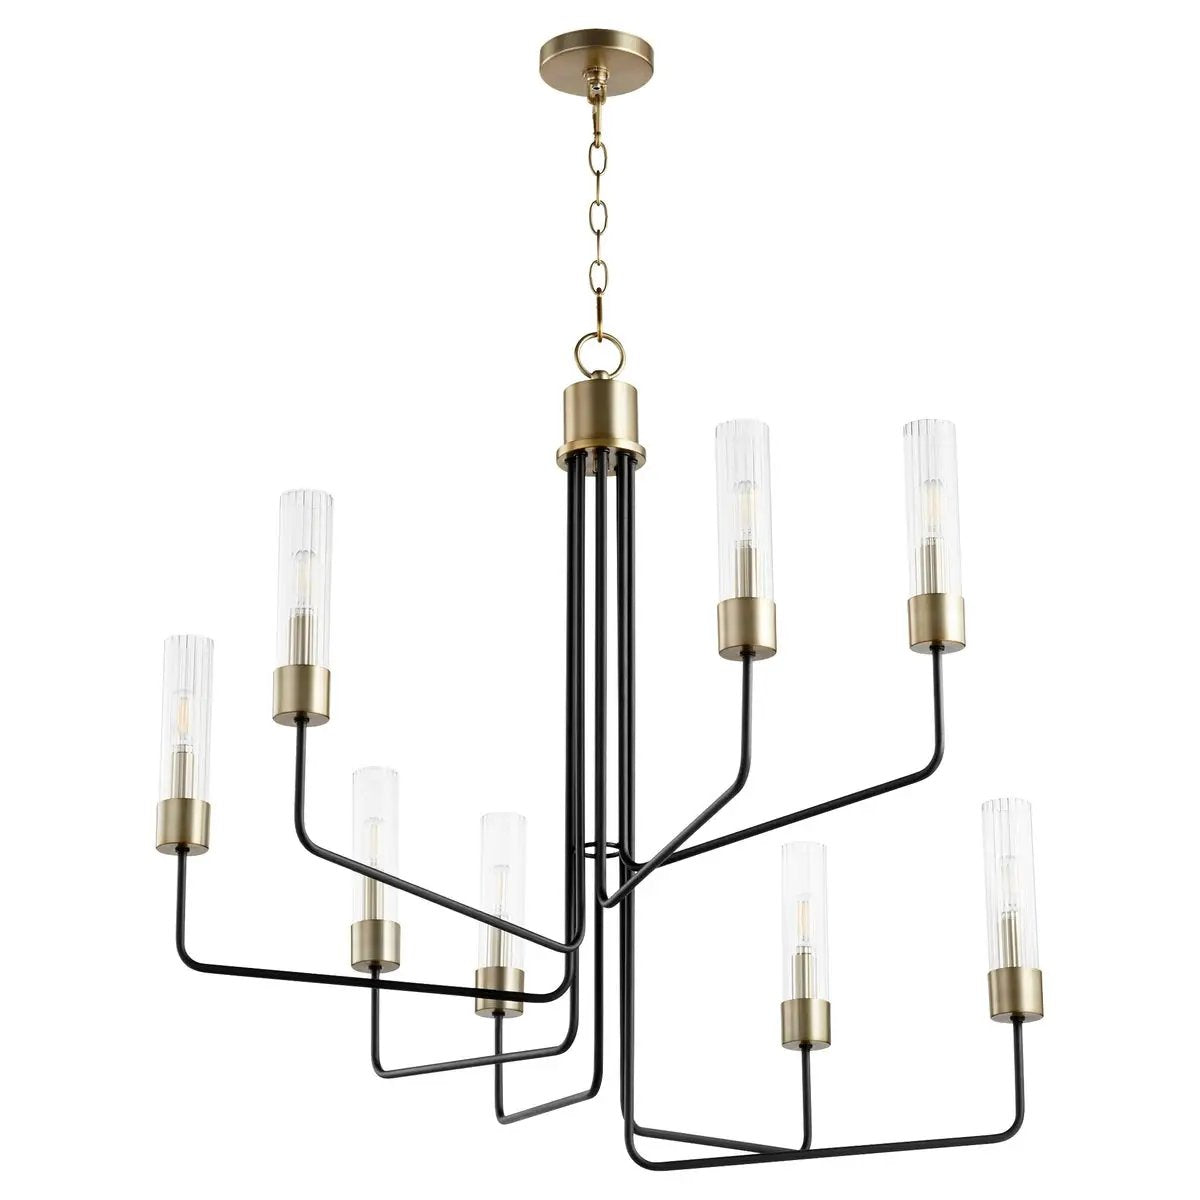 Transitional chandelier with clear glass bulbs and tubes, featuring a linear frame and soft-angular curves. Two-toned aged brass and noir finish. Suitable for indoor and outdoor spaces. Adjustable chain/stem hung suspension system. 34.5"W x 33.5"H. Quorum International.